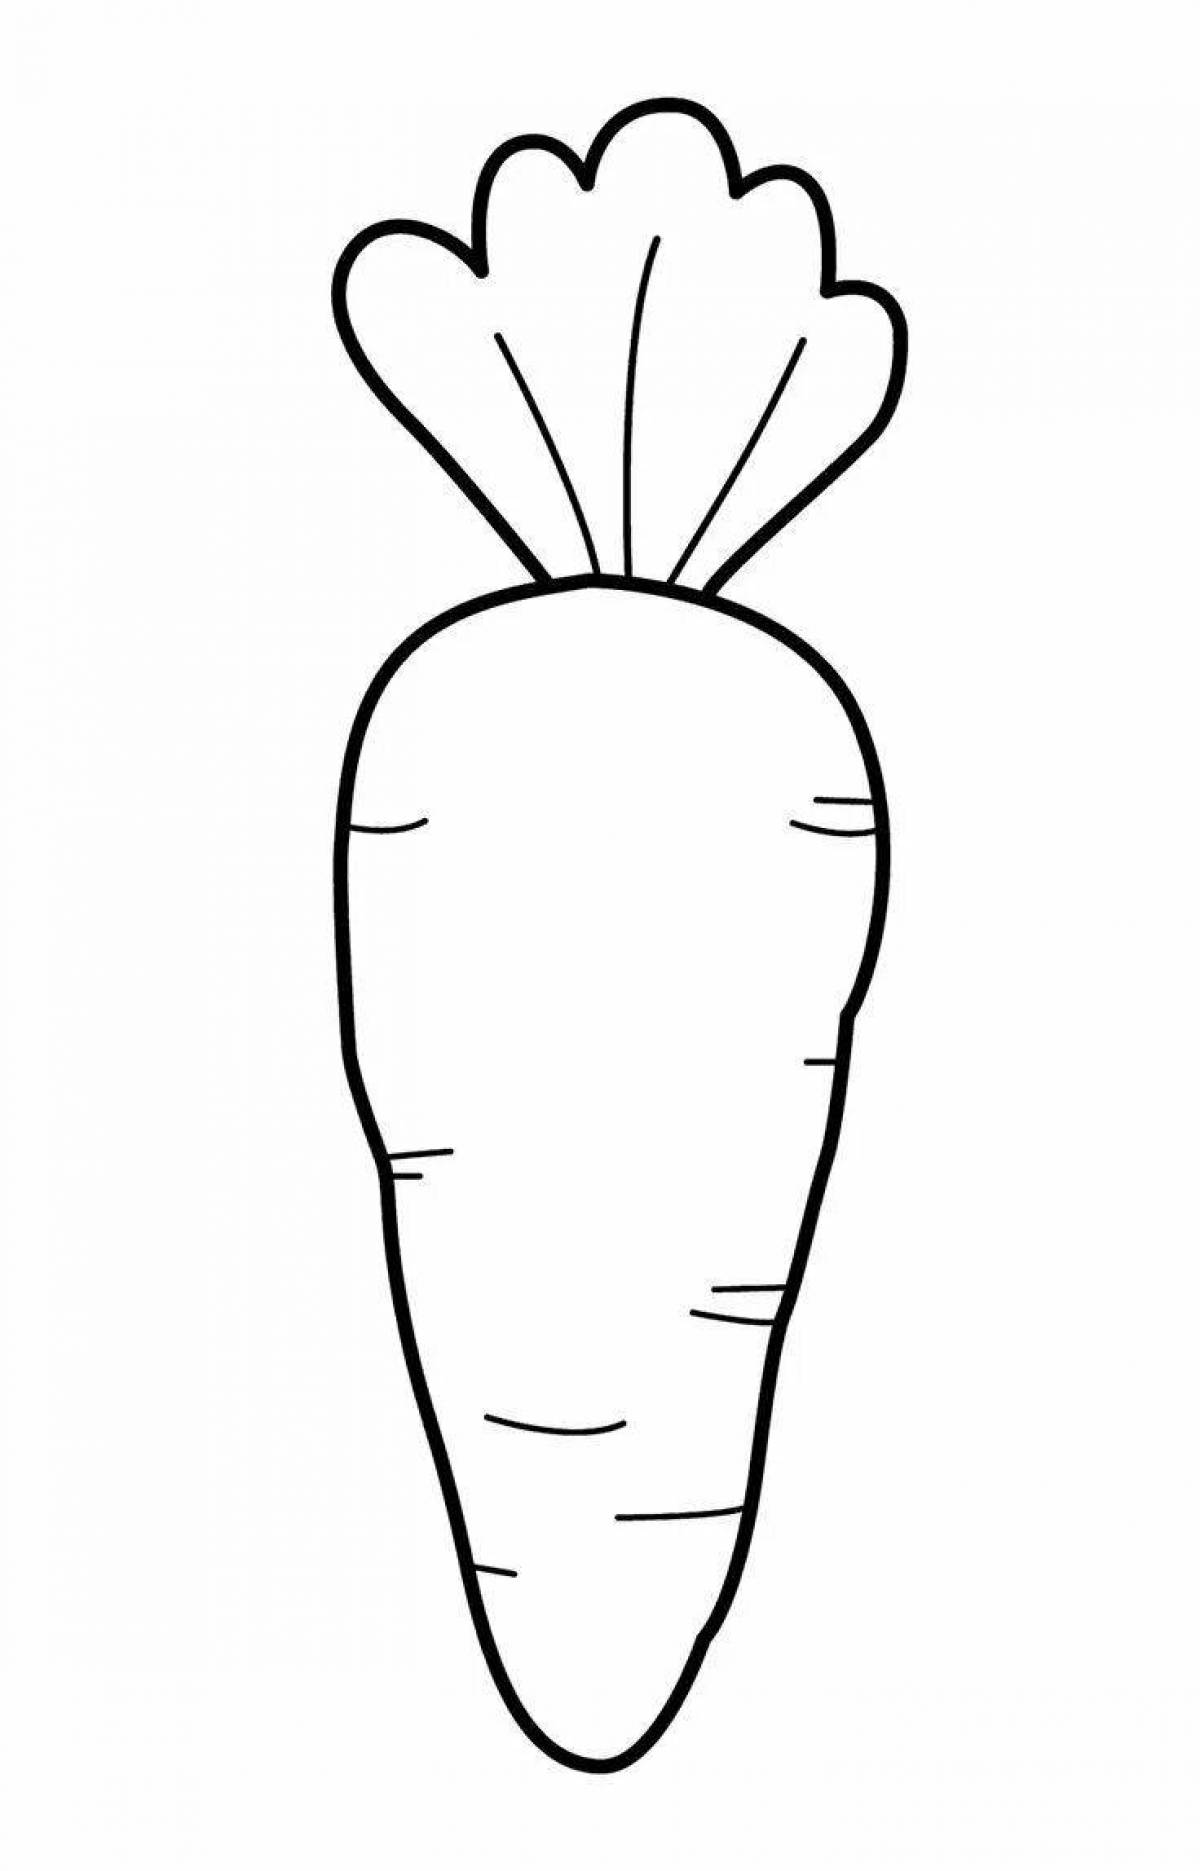 Cute carrot drawing for kids